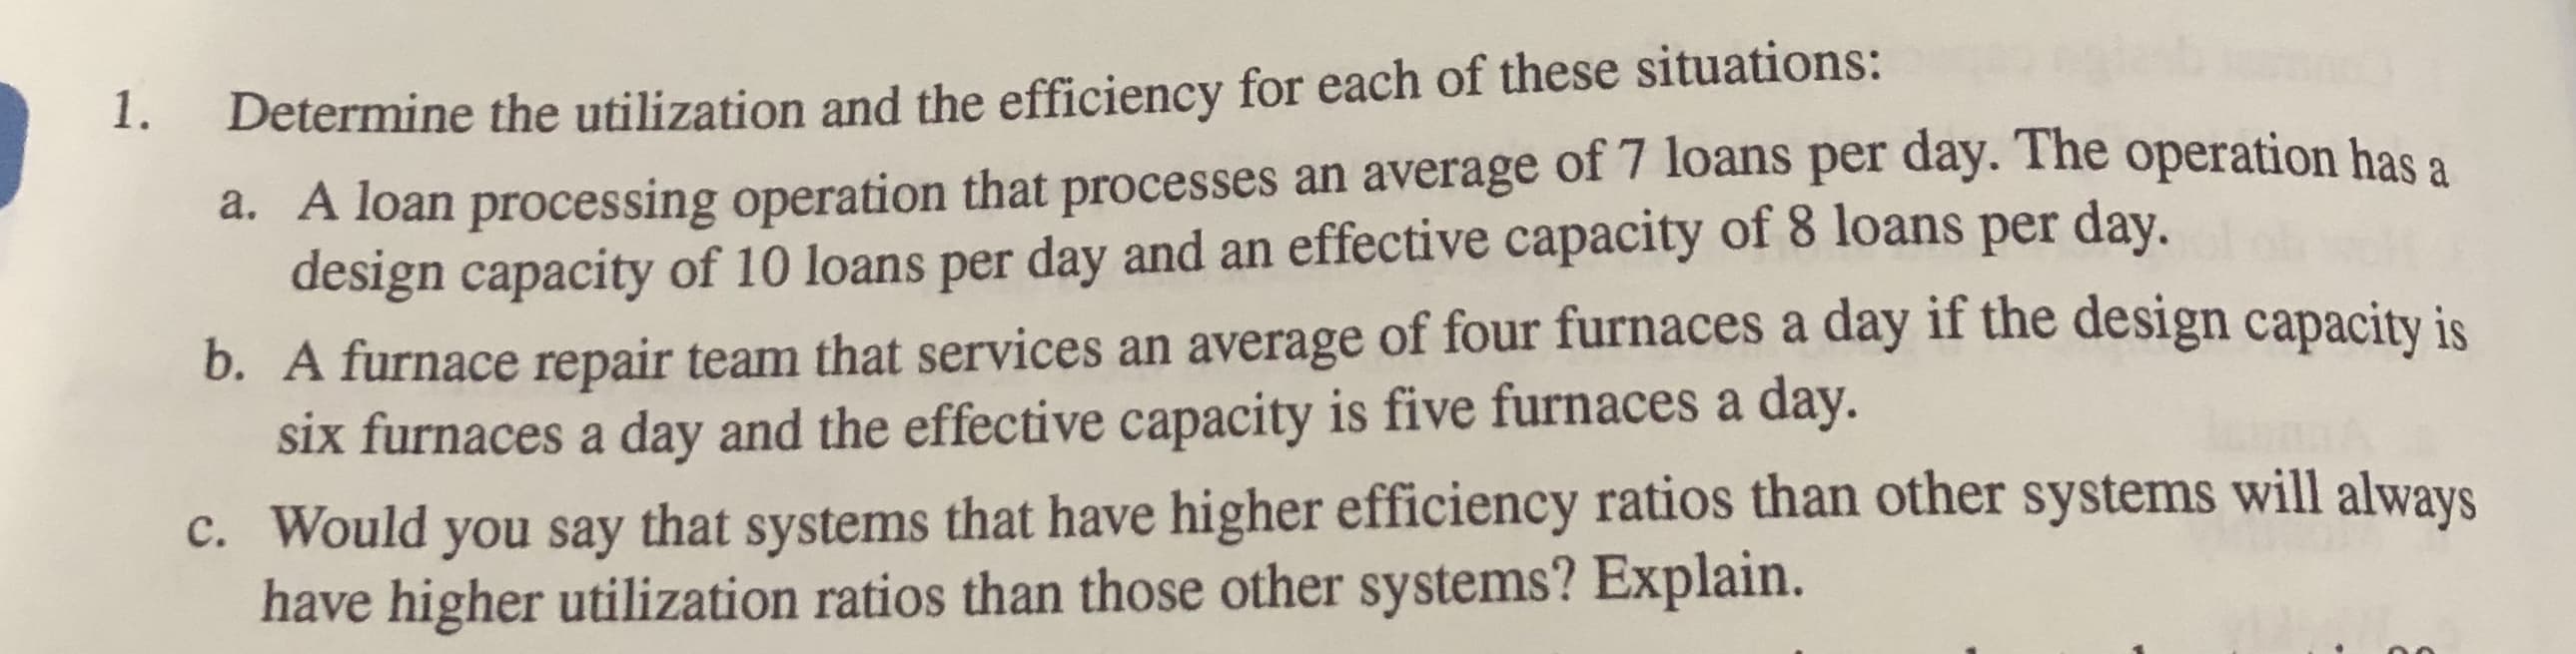 1.
Determine the utilization and the efficiency for each of these situations:
a. A loan processing operation that processes an average of 7 loans per day. The operation has a
design capacity of 10 loans per day and an effective capacity of 8 loans per day.
b. A furnace repair team that services an average of four furnaces a day if the design capacity is
six furnaces a day and the effective capacity is five furnaces a day.
c. Would you say that systems that have higher efficiency ratios than other systems will always
с.
have higher utilization ratios than those other systems? Explain.
